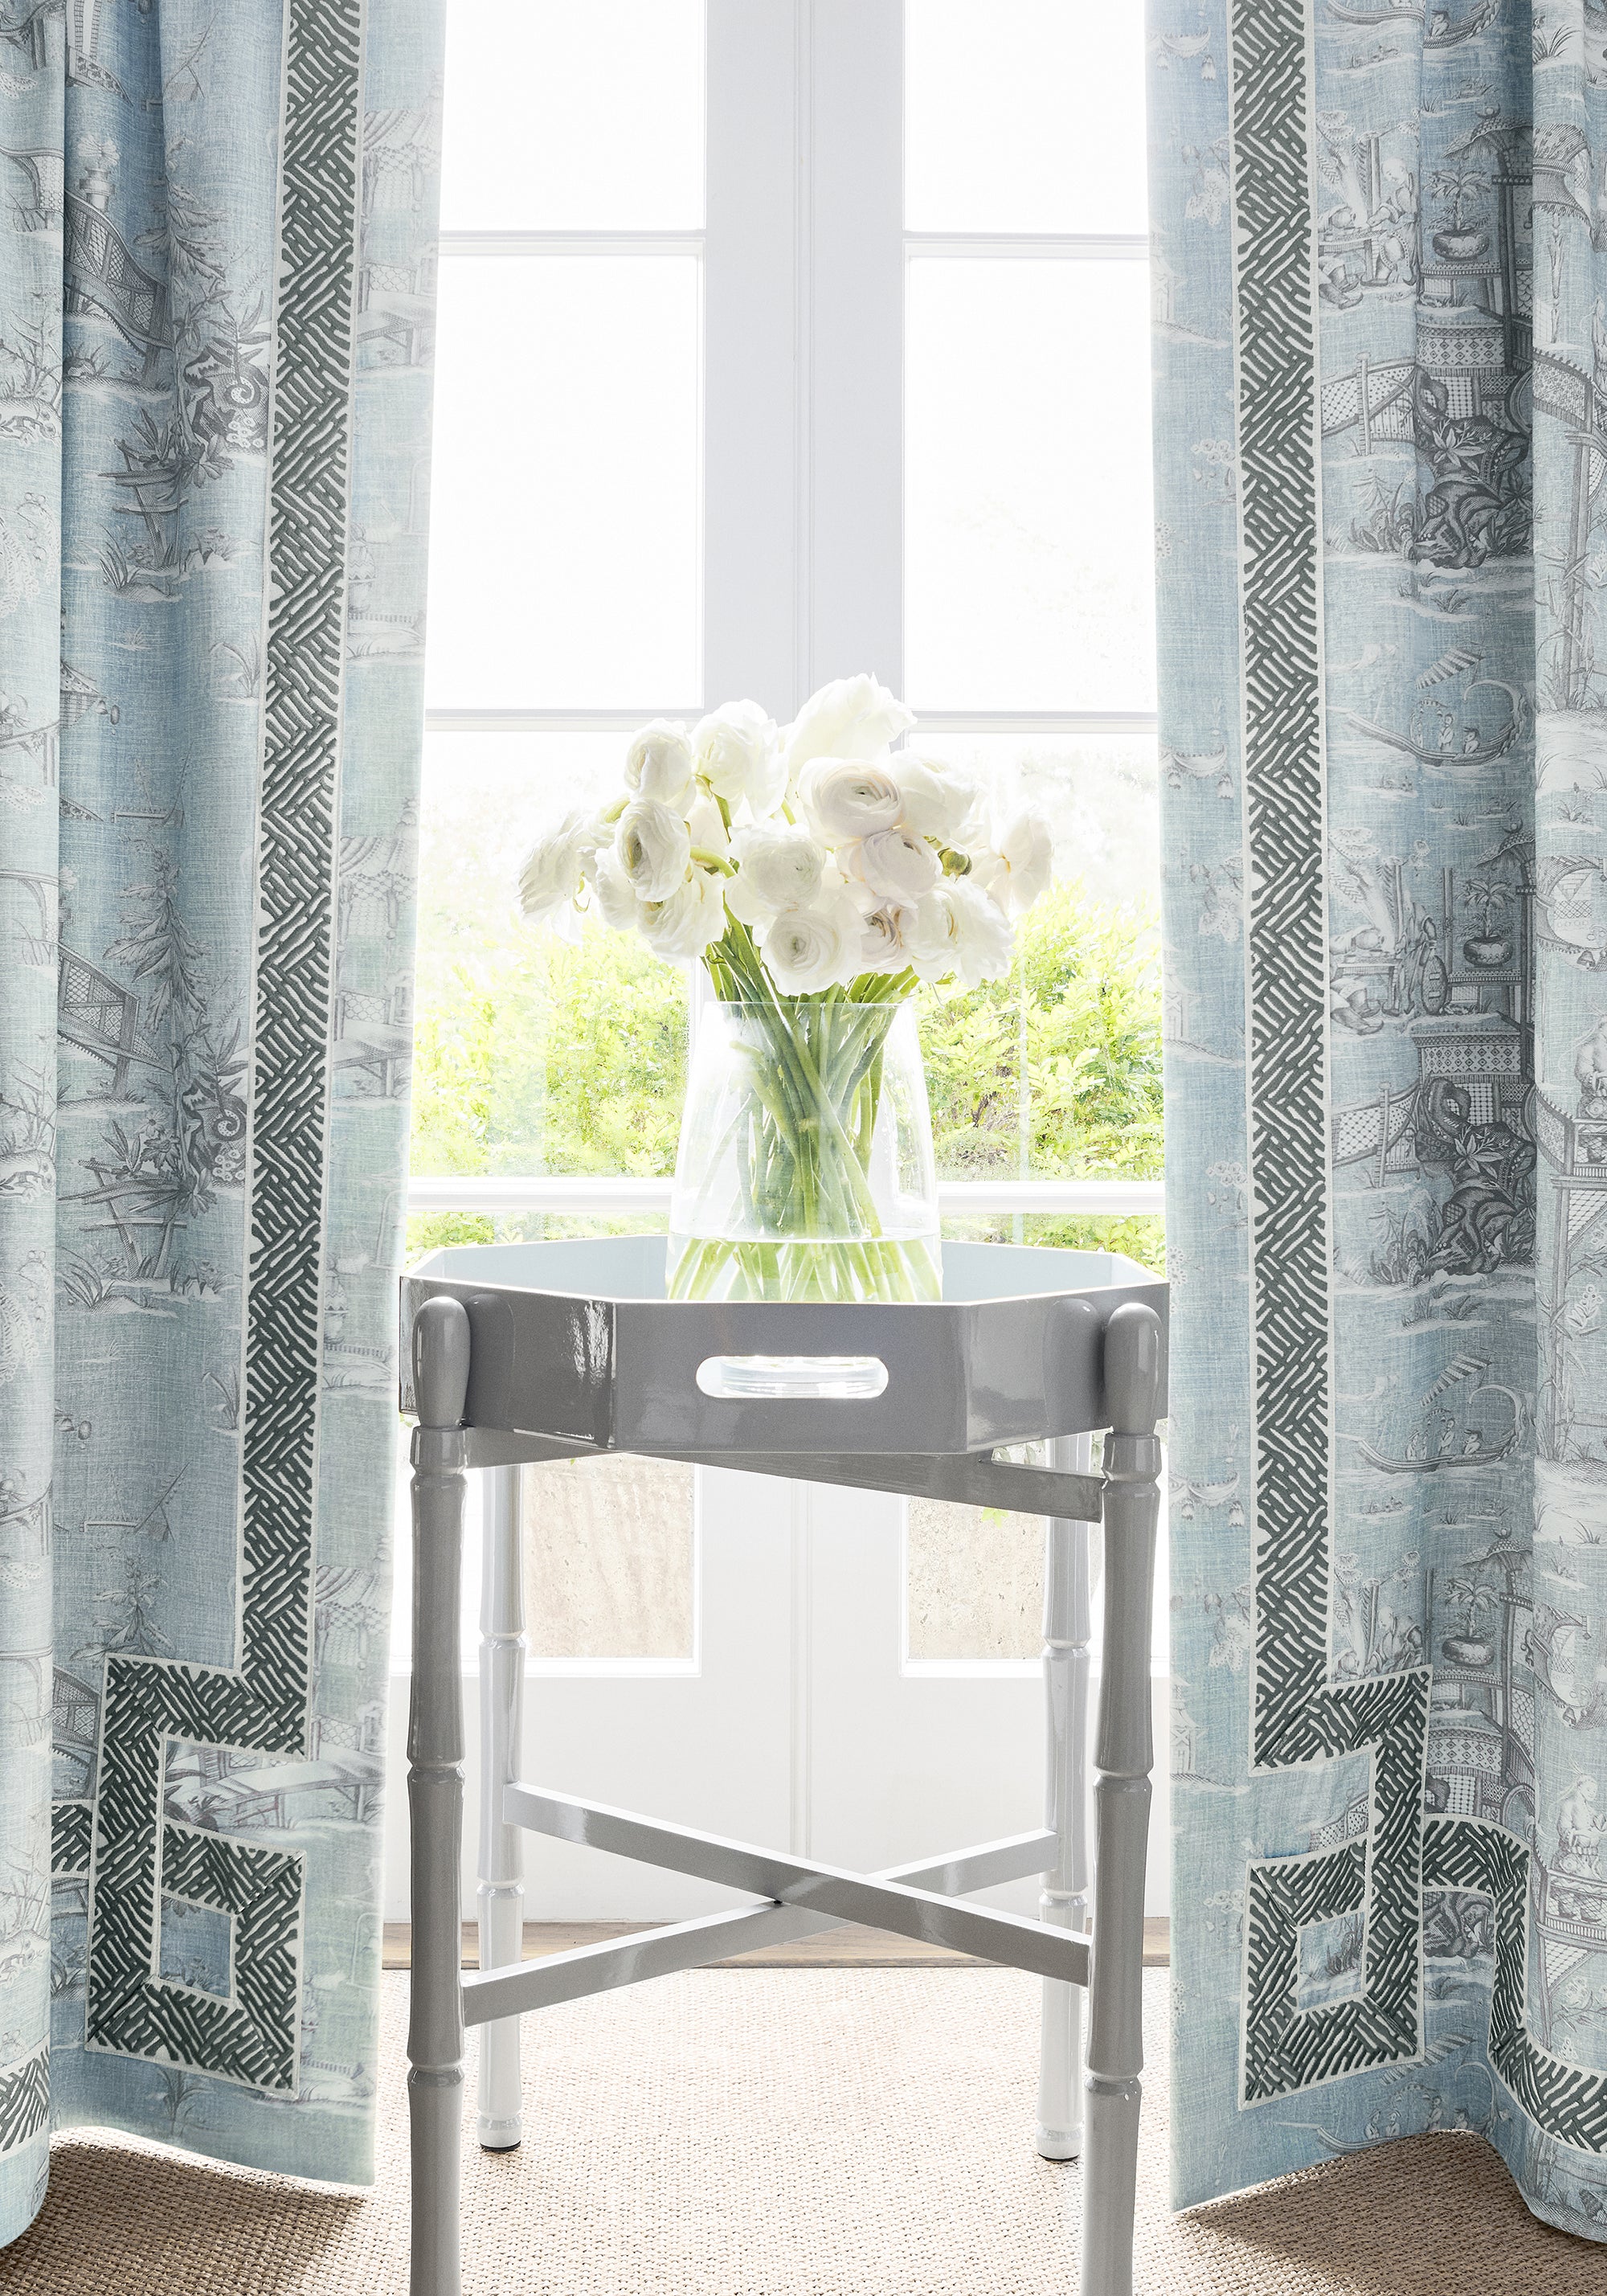 Drapery in Cheng Toile printed fabric in robins egg color - pattern number F975468 by Thibaut in the Dynasty collection